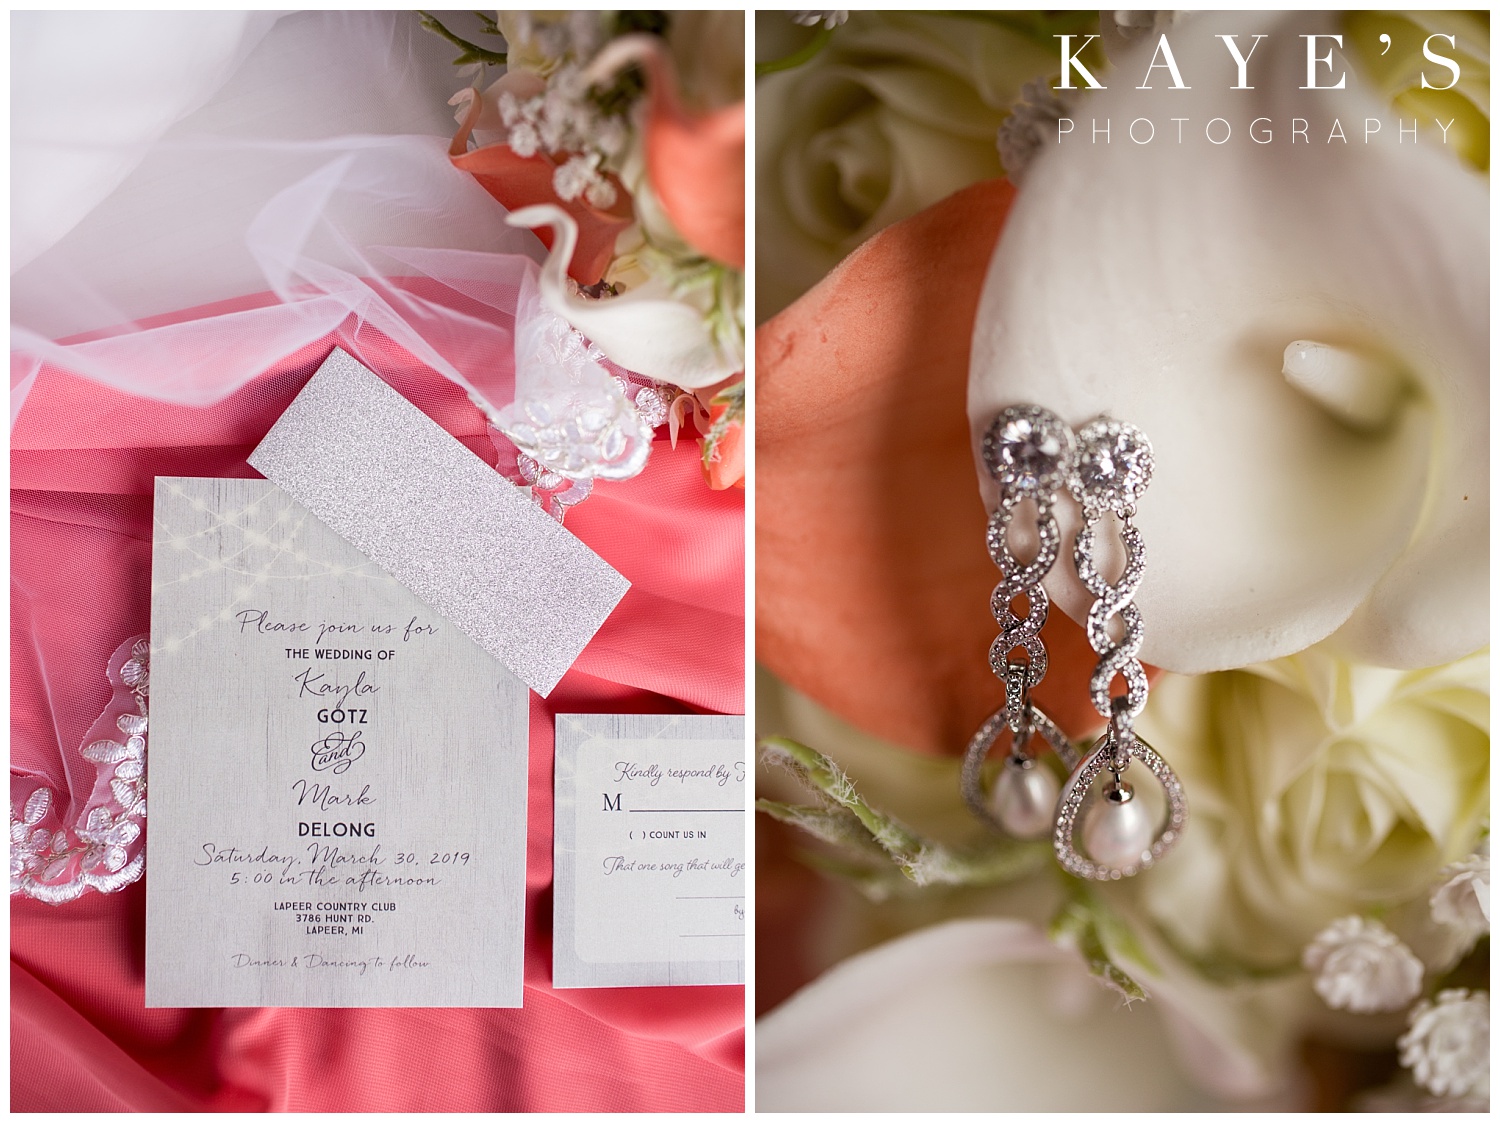 Bride details in lapeer country club captured by kaye's photography